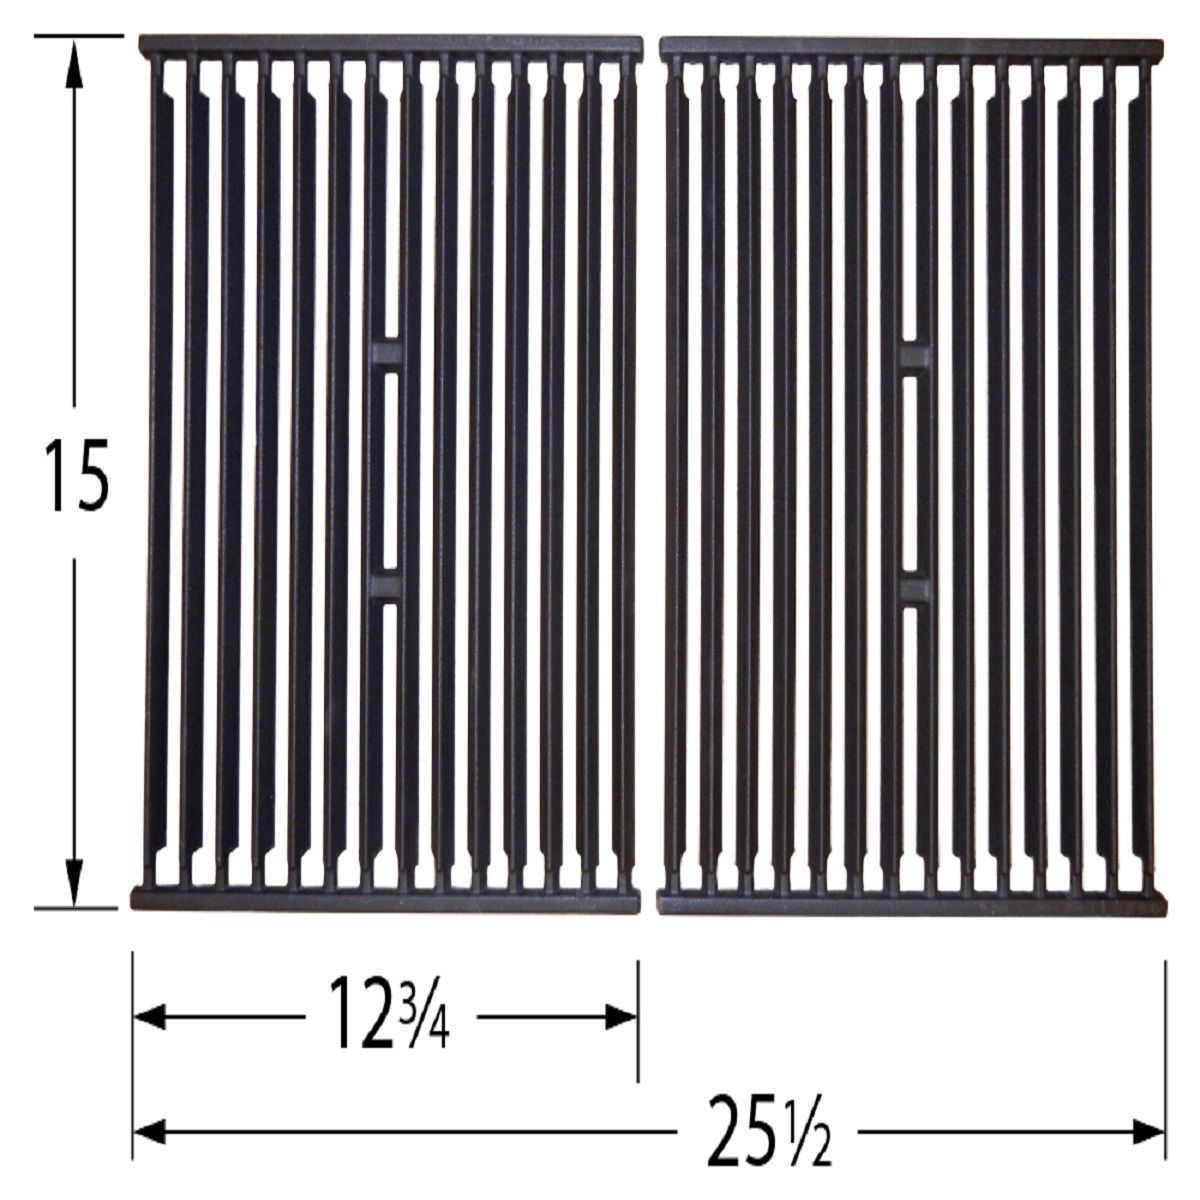 2pc Matte Cast Iron Cooking Grid for Broil King and Broil King Crown Gas Grills 25.5" - image 2 of 2